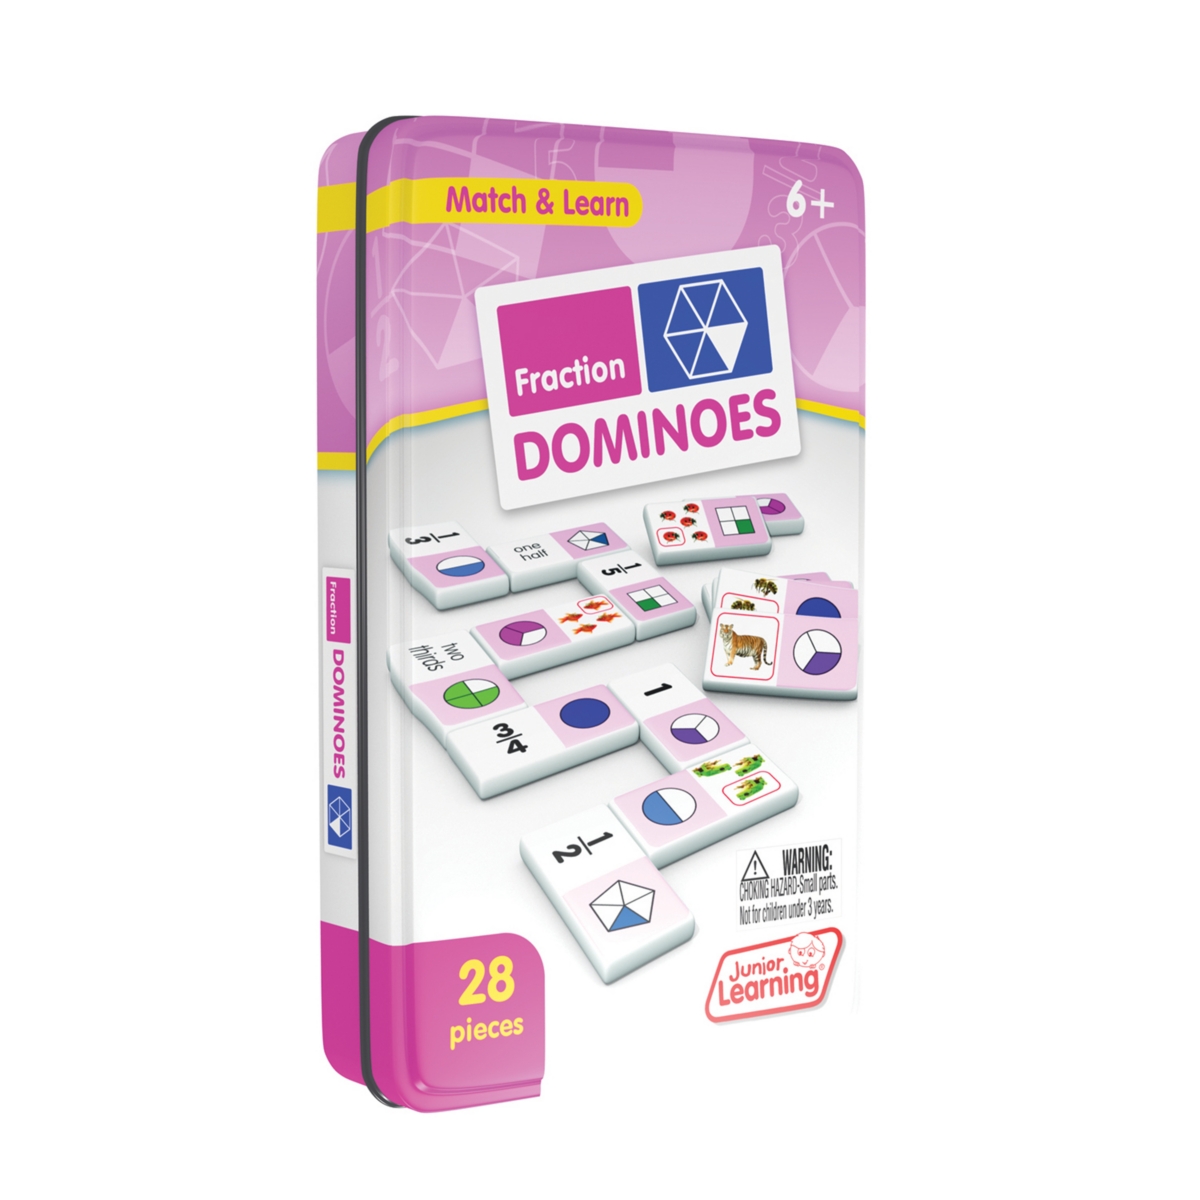 Junior Learning Kids' Fraction Dominoes Match And Learn Educational Learning Game In Multi